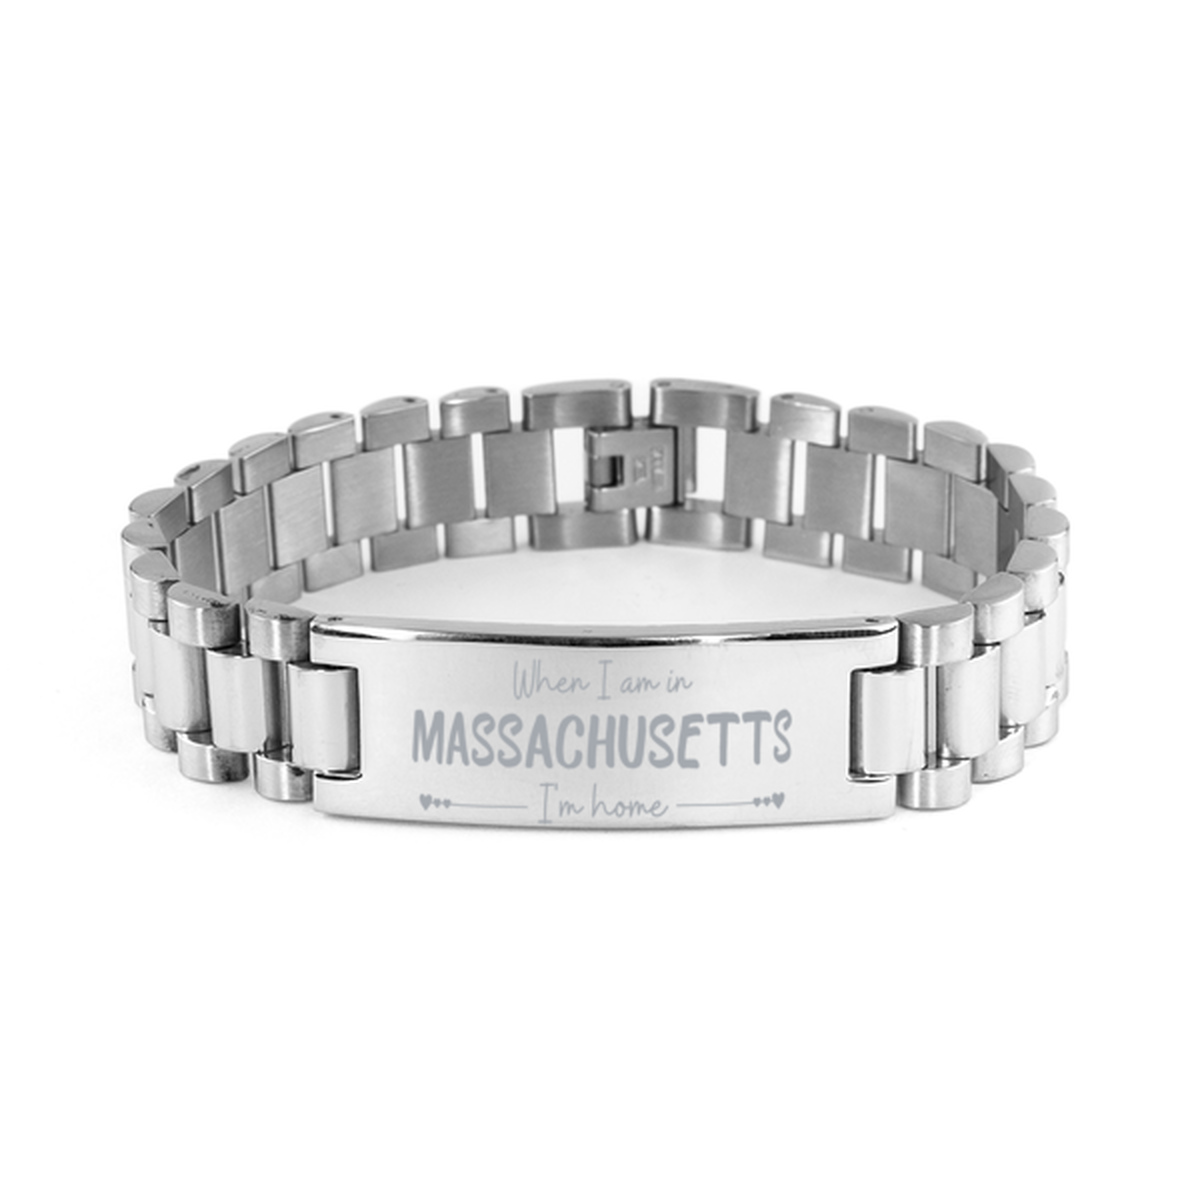 When I am in Massachusetts I'm home Ladder Stainless Steel Bracelet, Cheap Gifts For Massachusetts, State Massachusetts Birthday Gifts for Friends Coworker